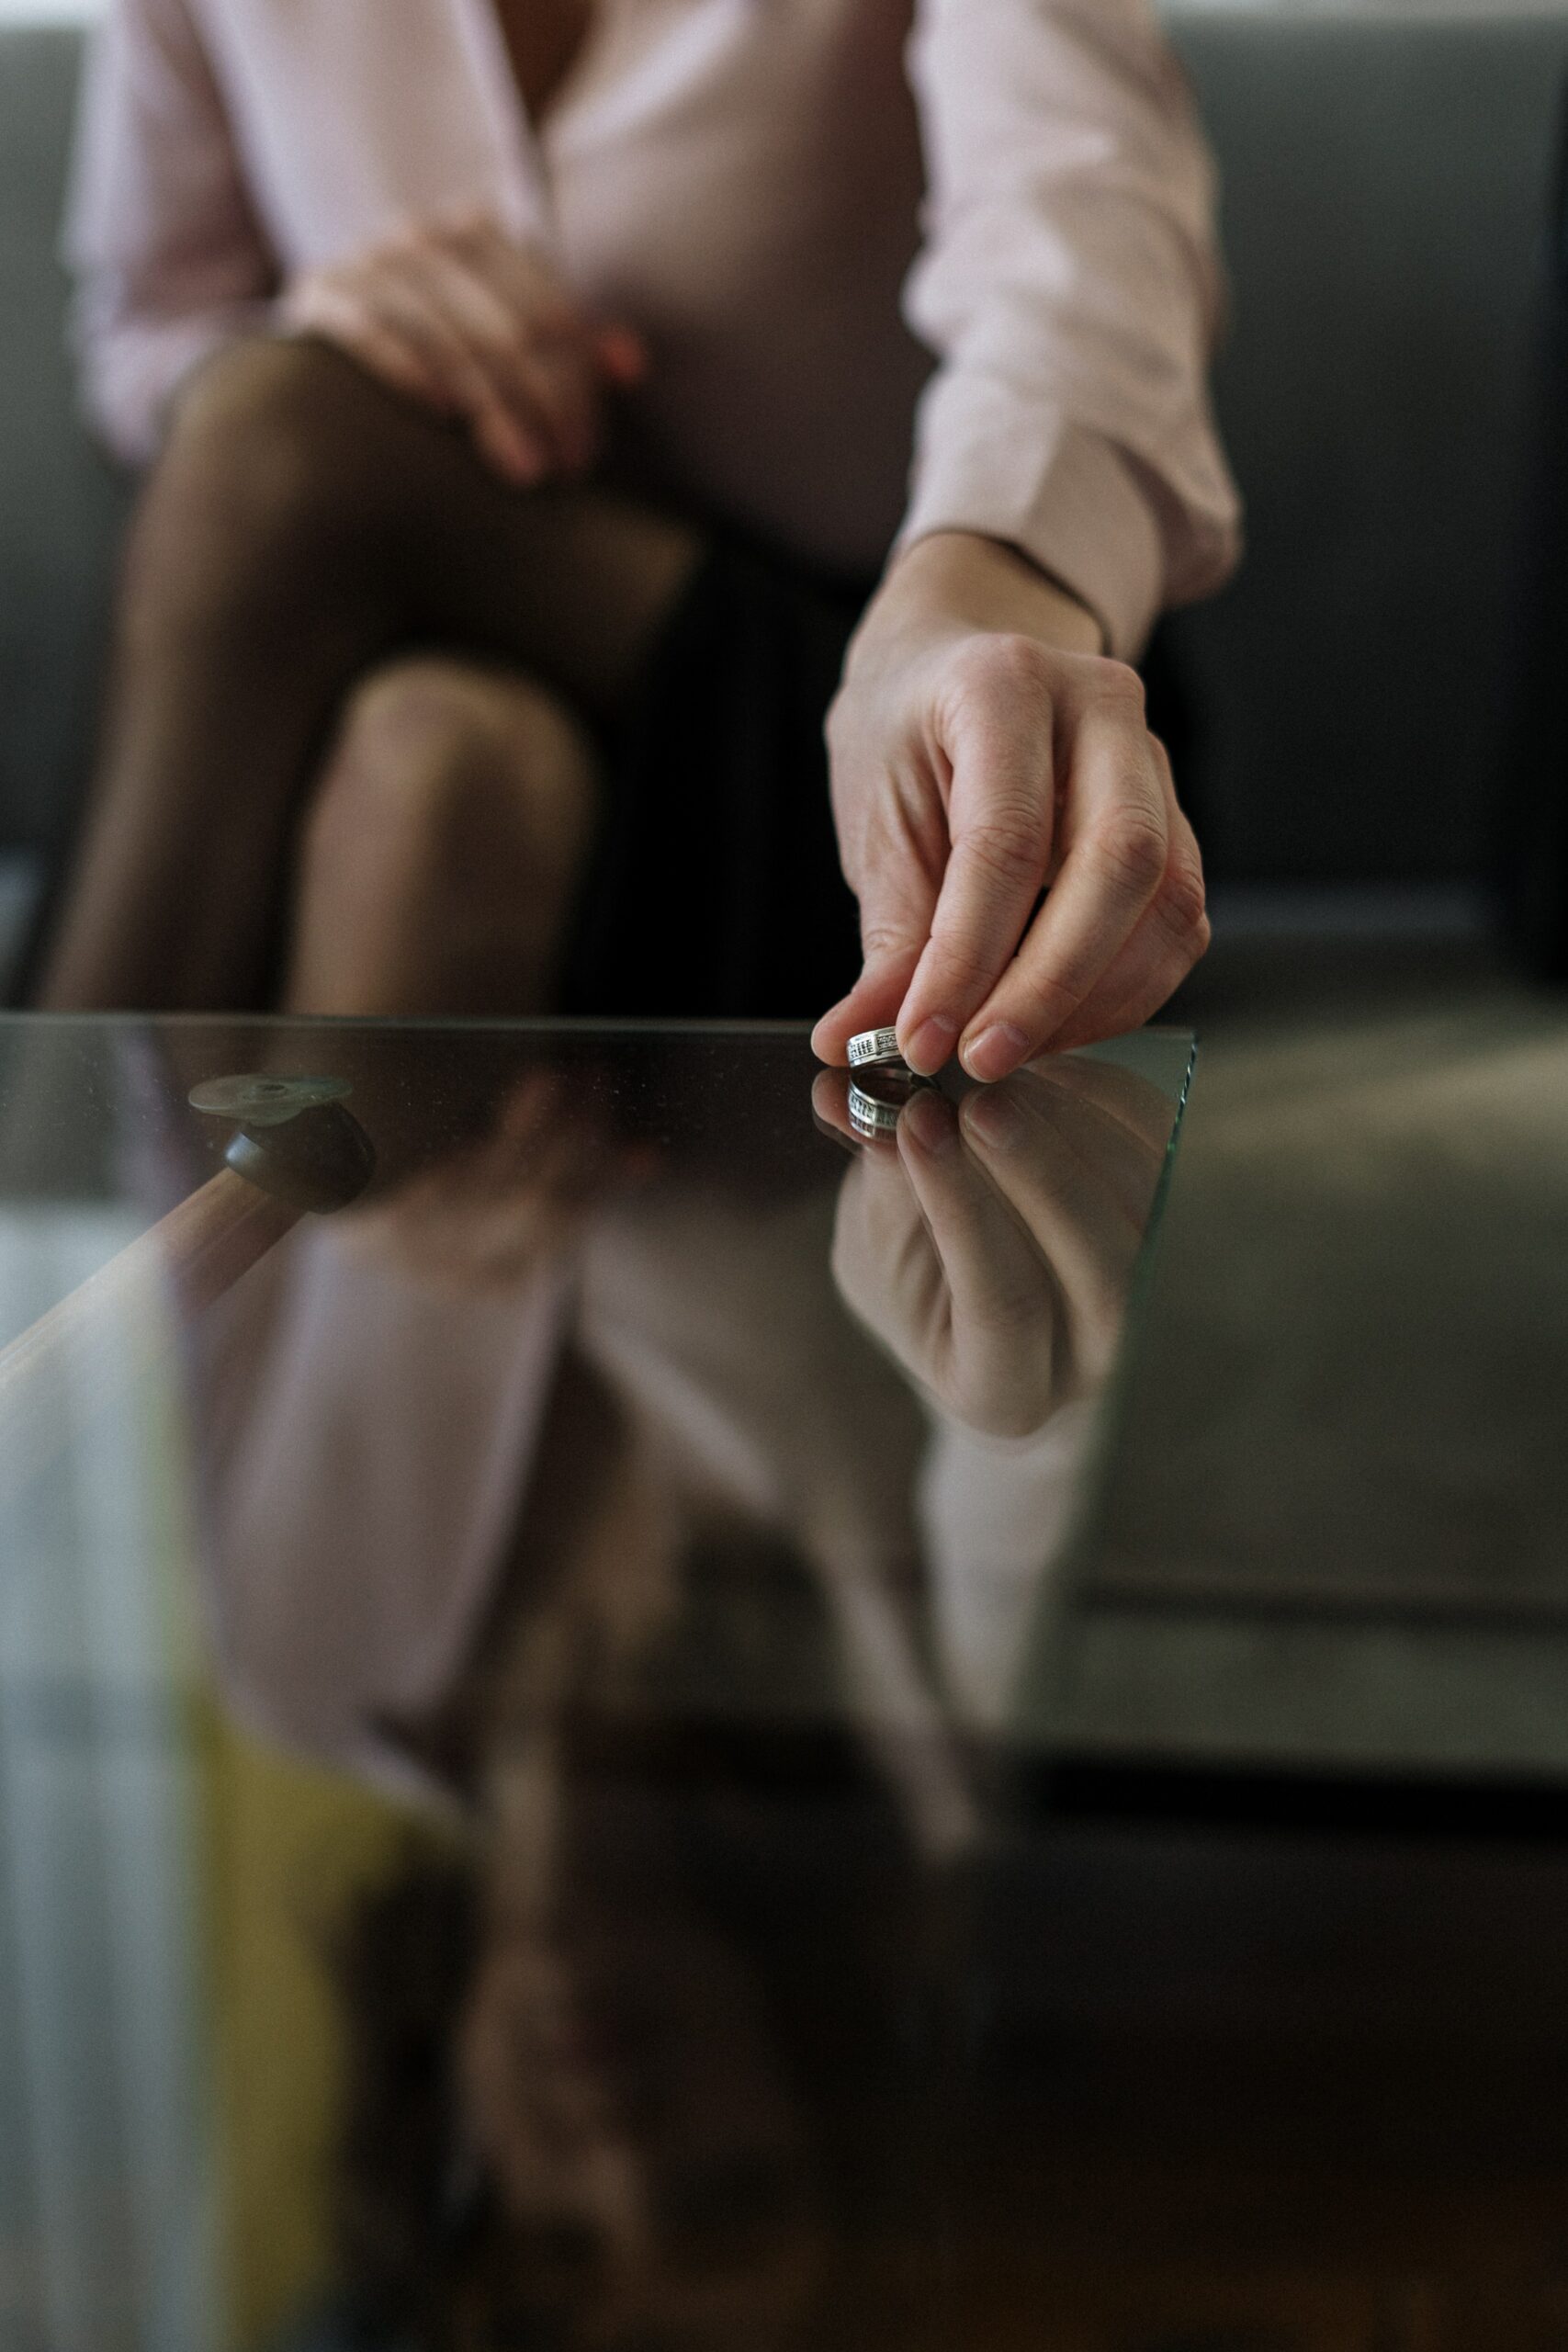 Man picking up ring from a reflective dark glass table